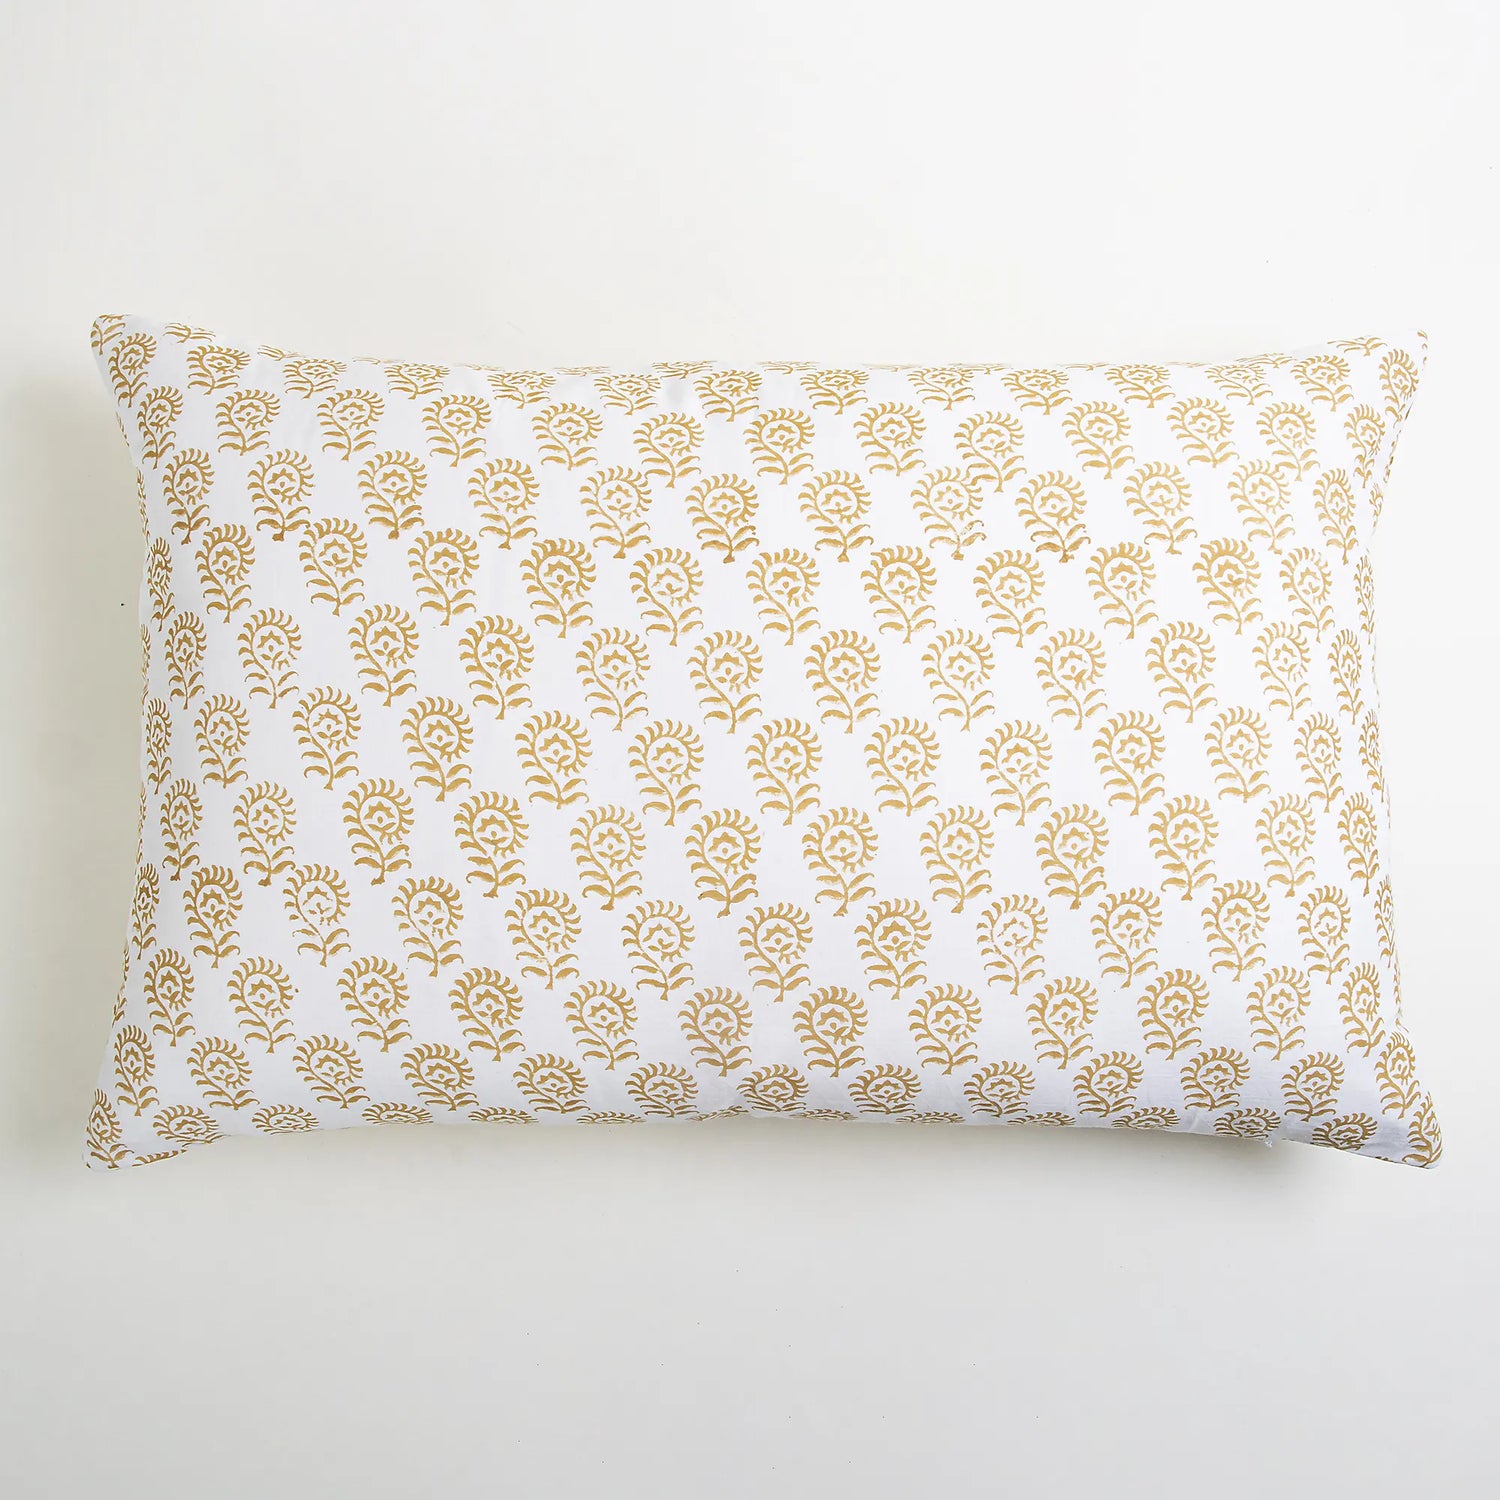 Yellow Flower Print Cotton Pillow Covers